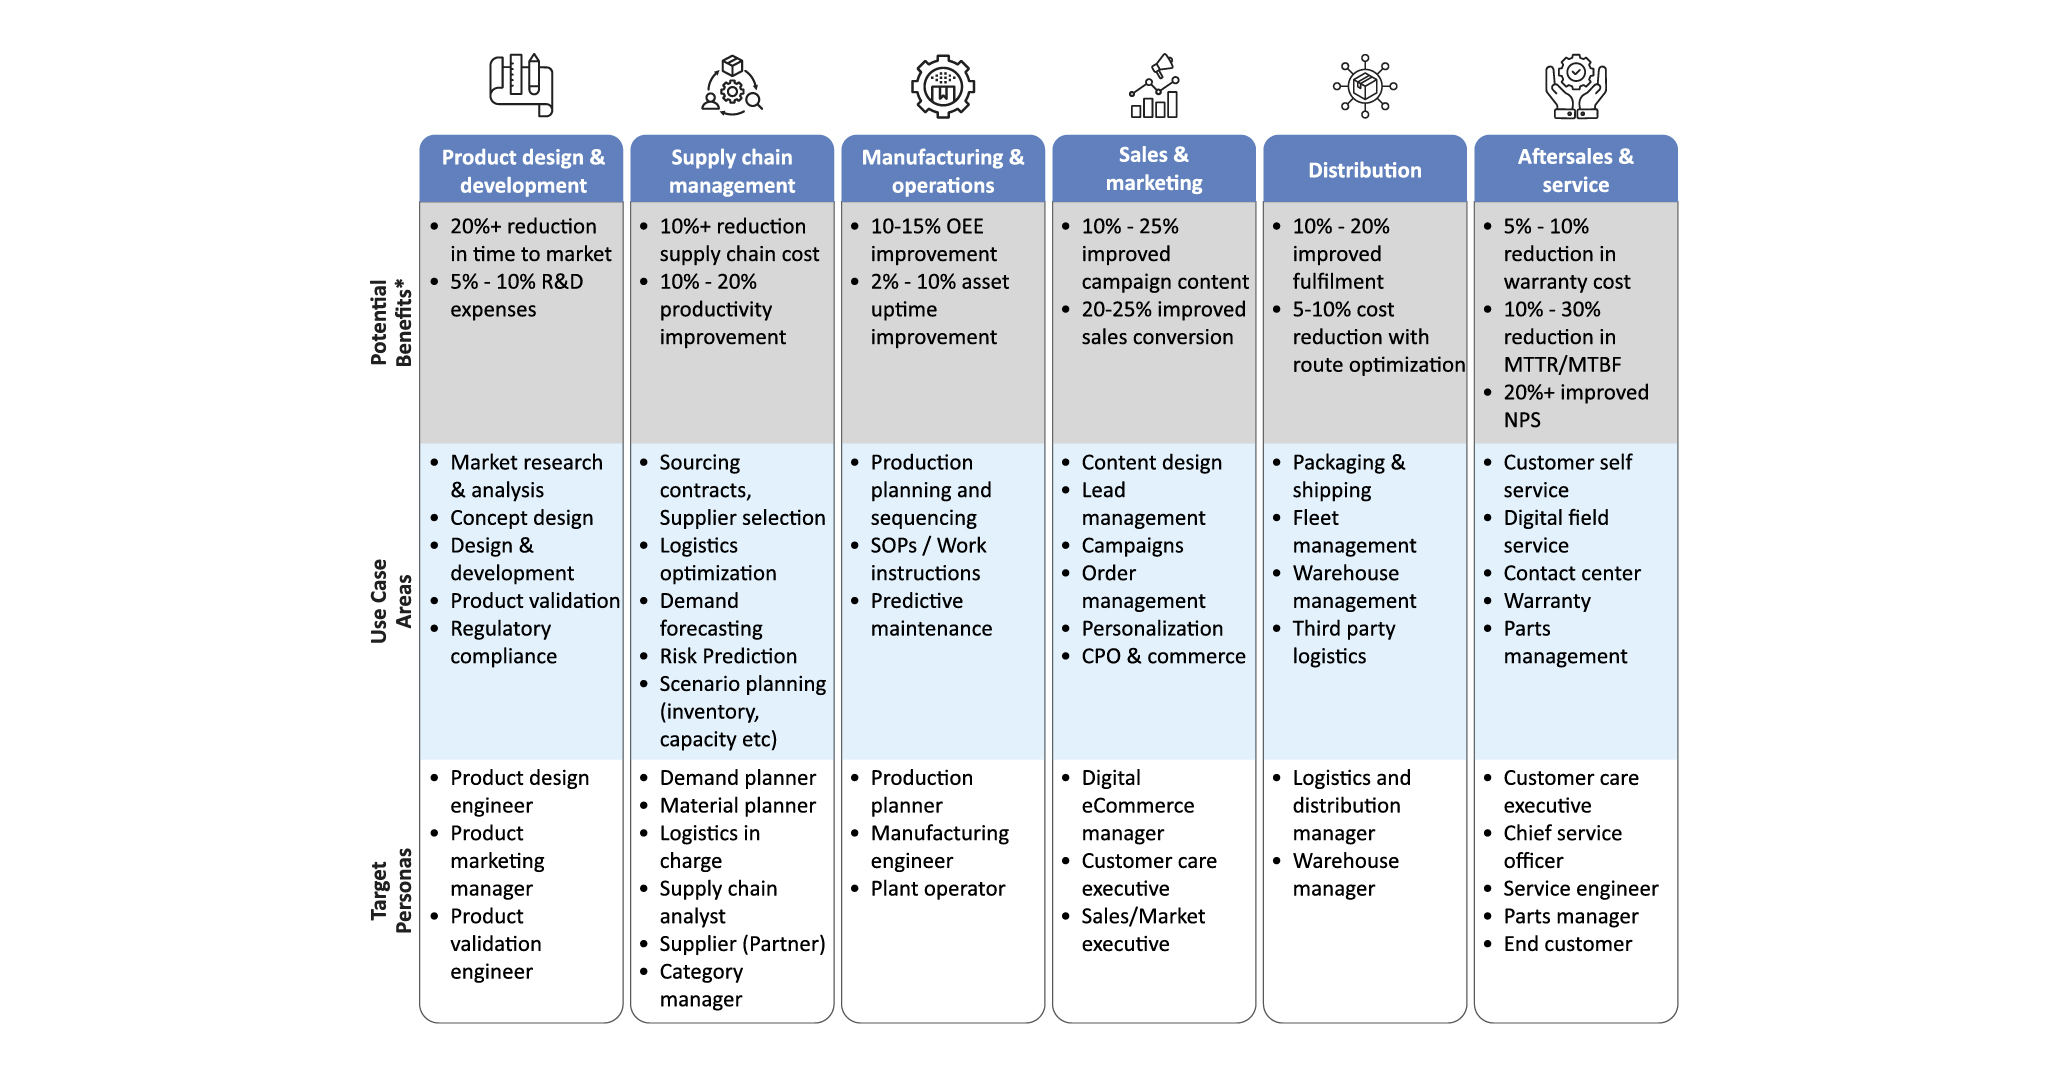 The image shows a table of six focus areas for product design and development, supply chain management, manufacturing and operations, sales and marketing, and aftersales services, and also includes relevant use cases and target personas, and the potential benefits GenAI will bring to each.